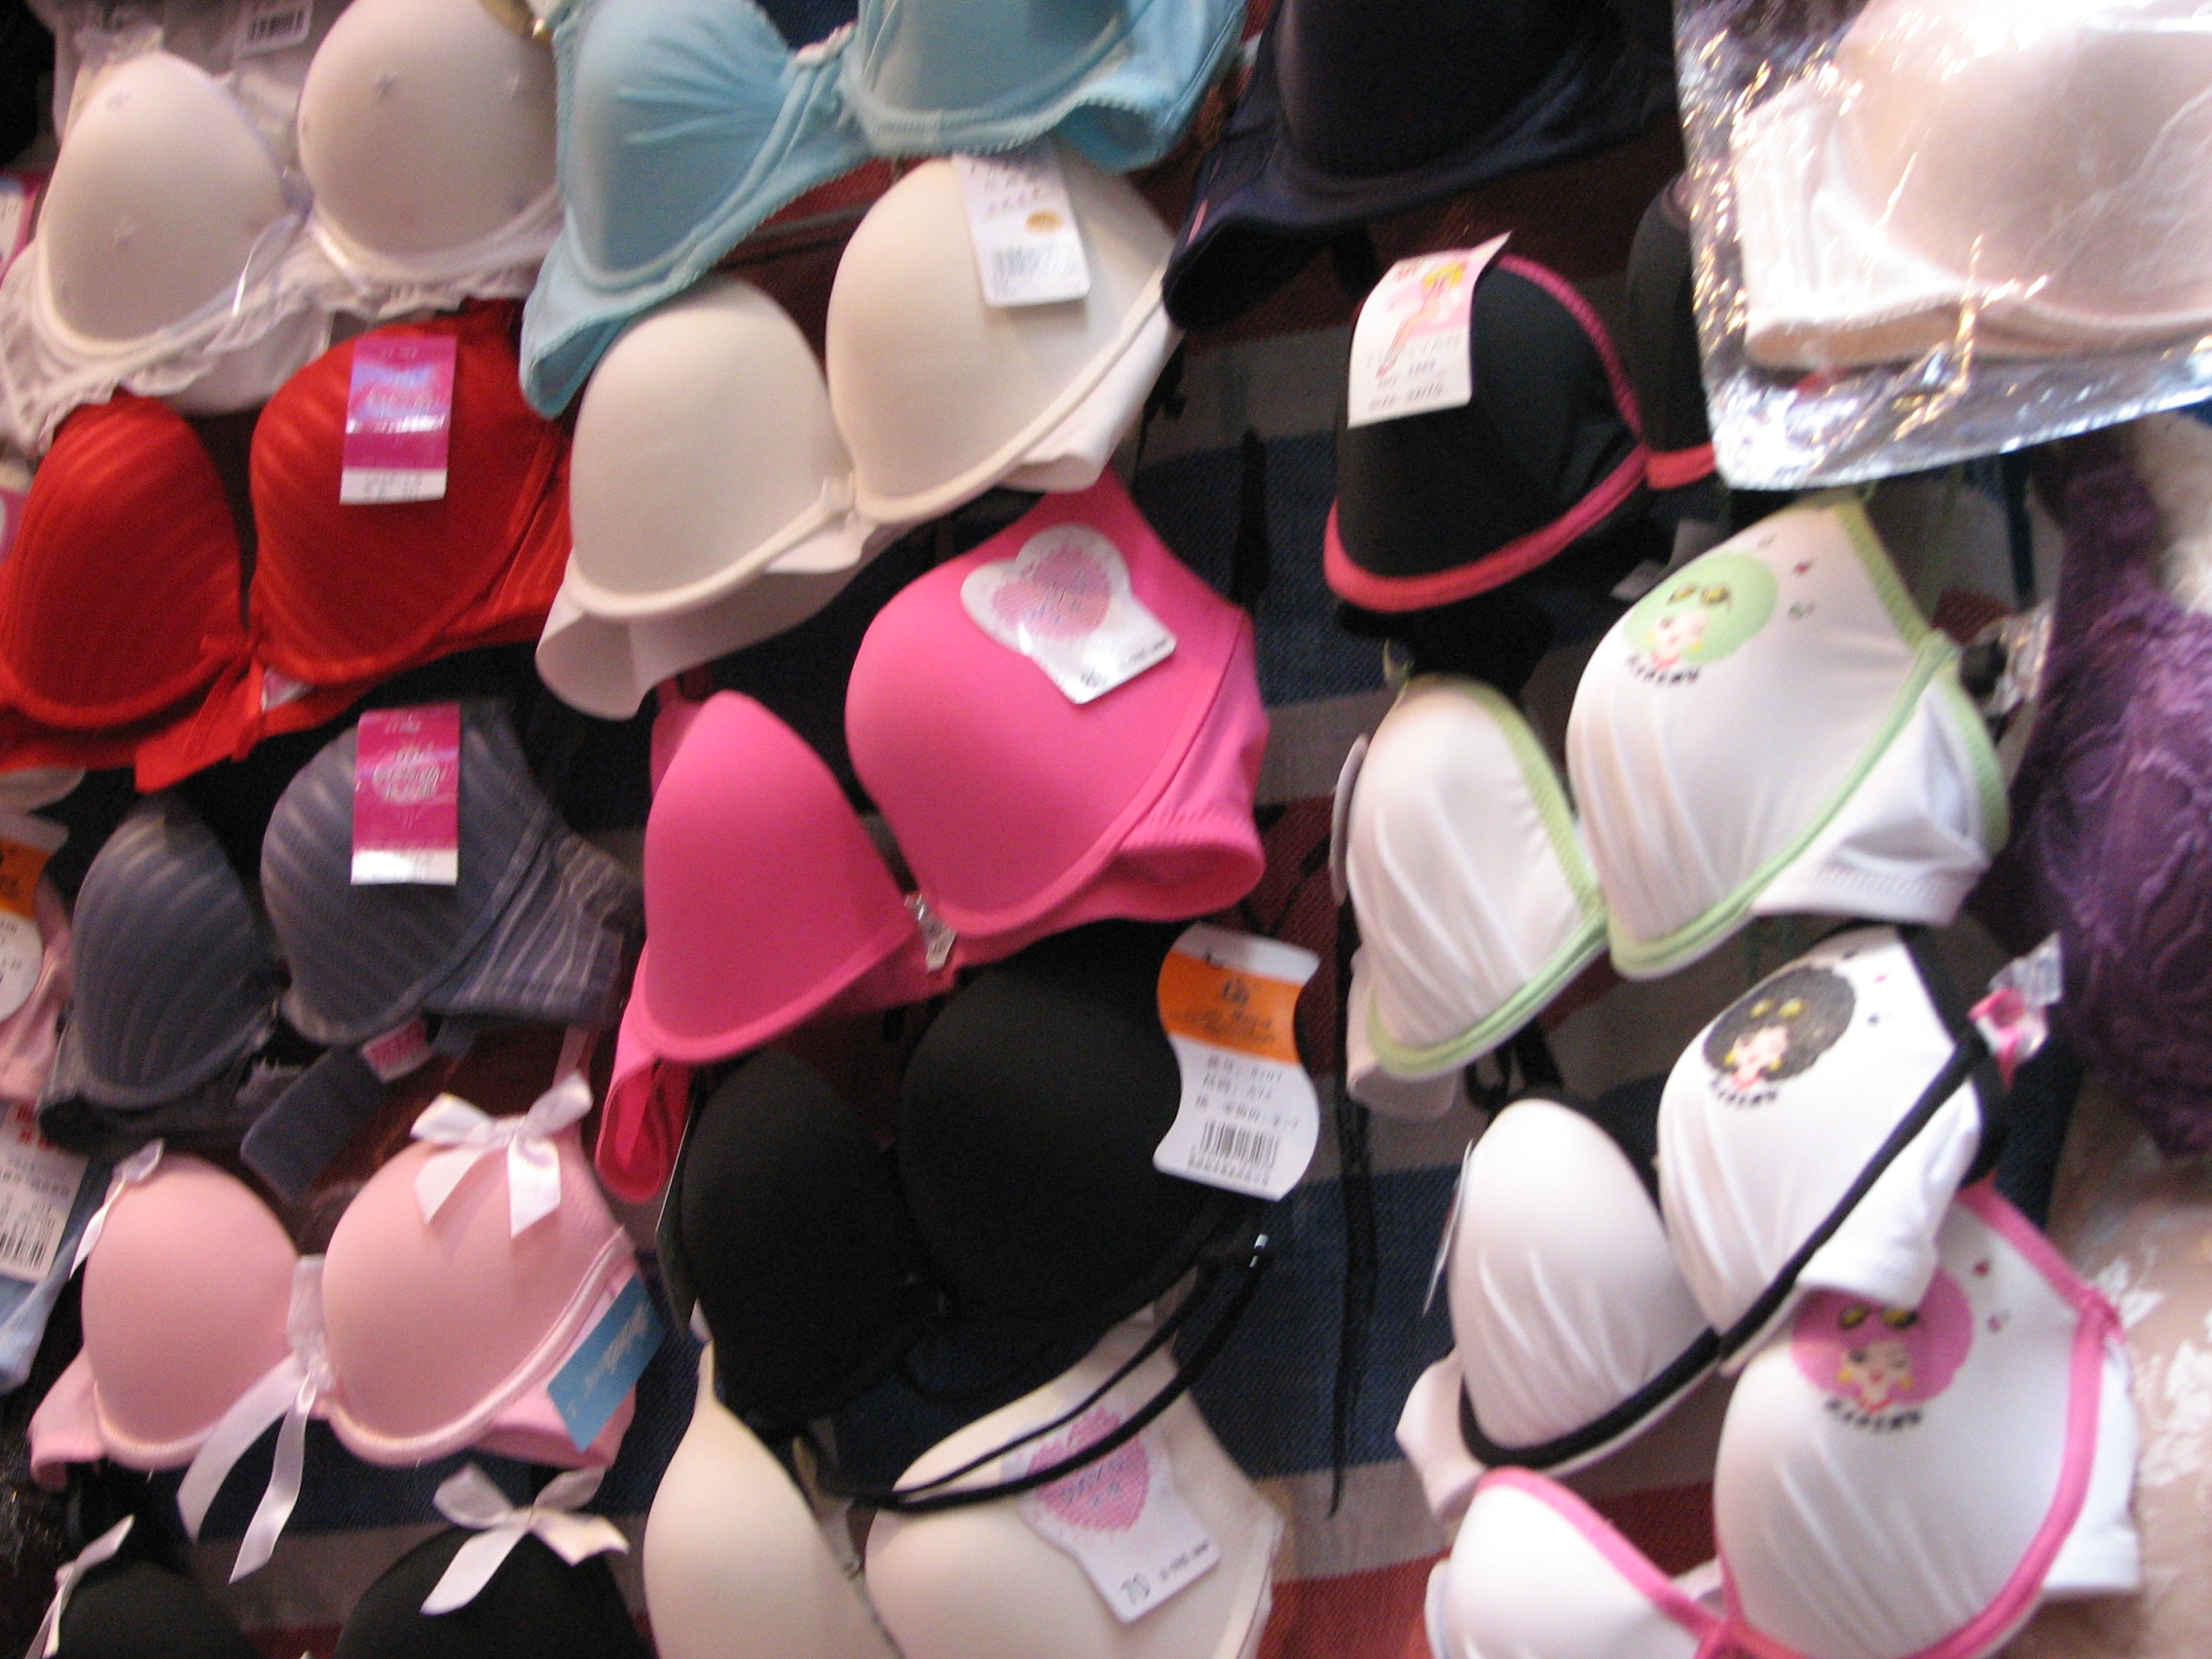 Various bras on display in the store